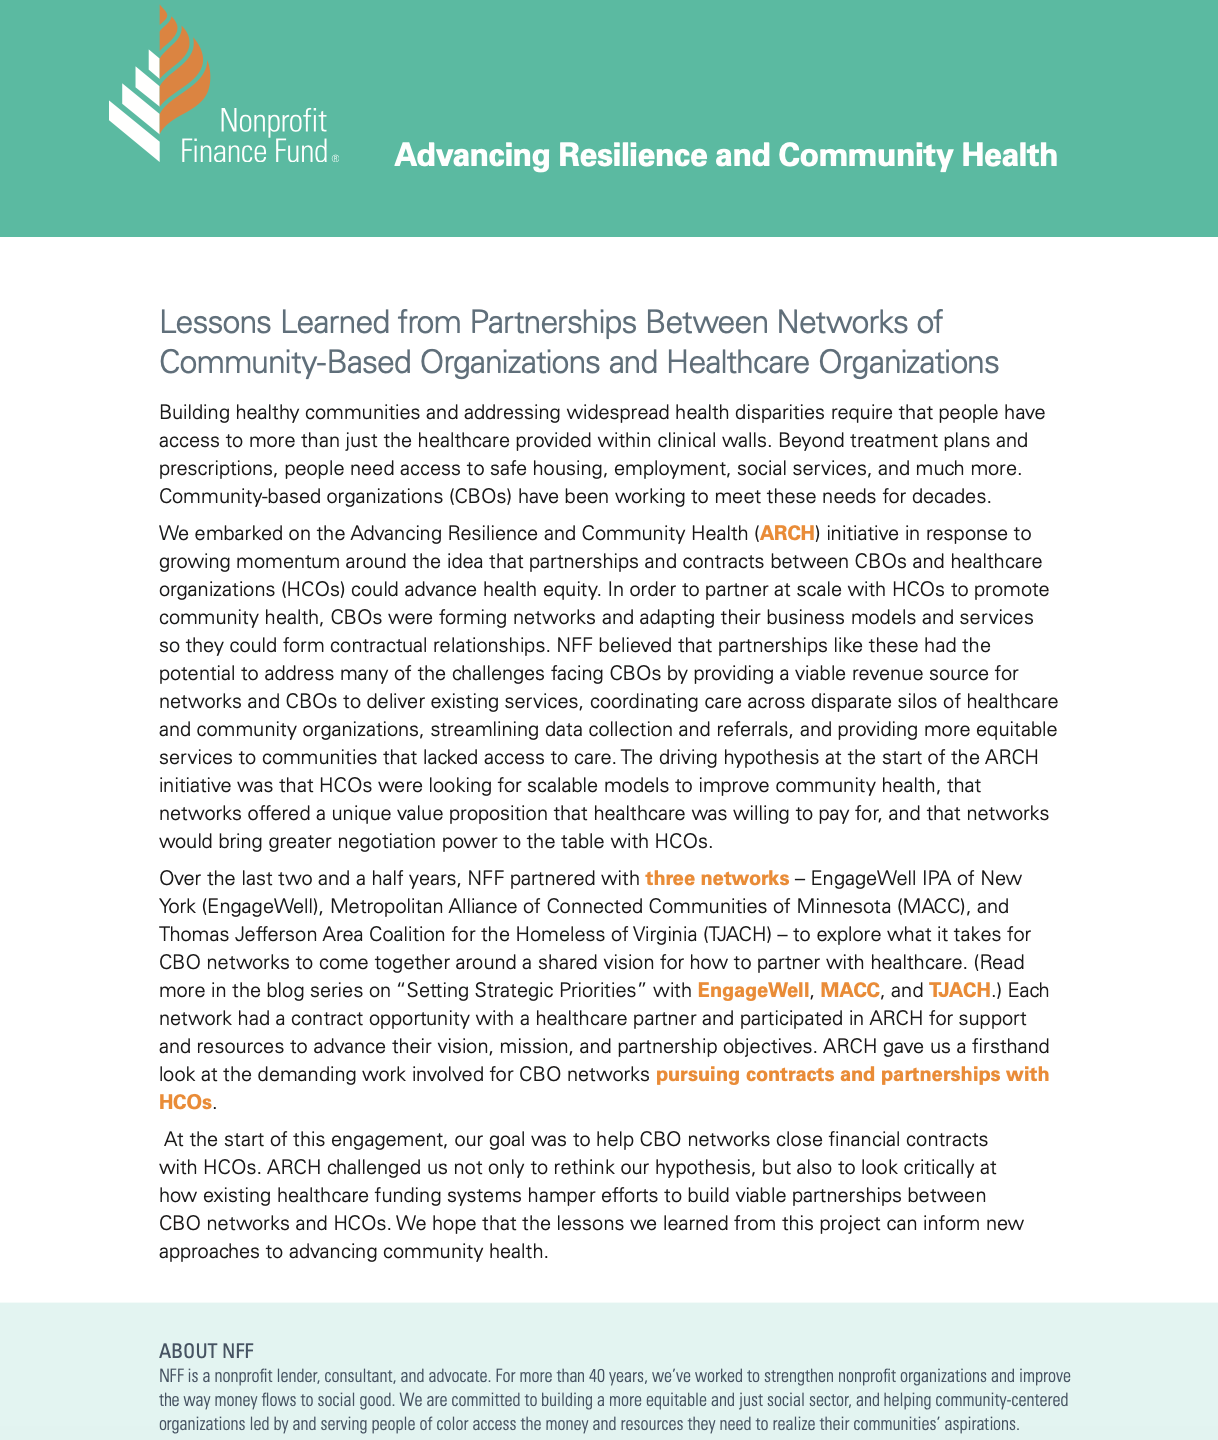 Lessons Learned from Partnerships Between Networks of Community-Based Organizations and Health Care Organizations